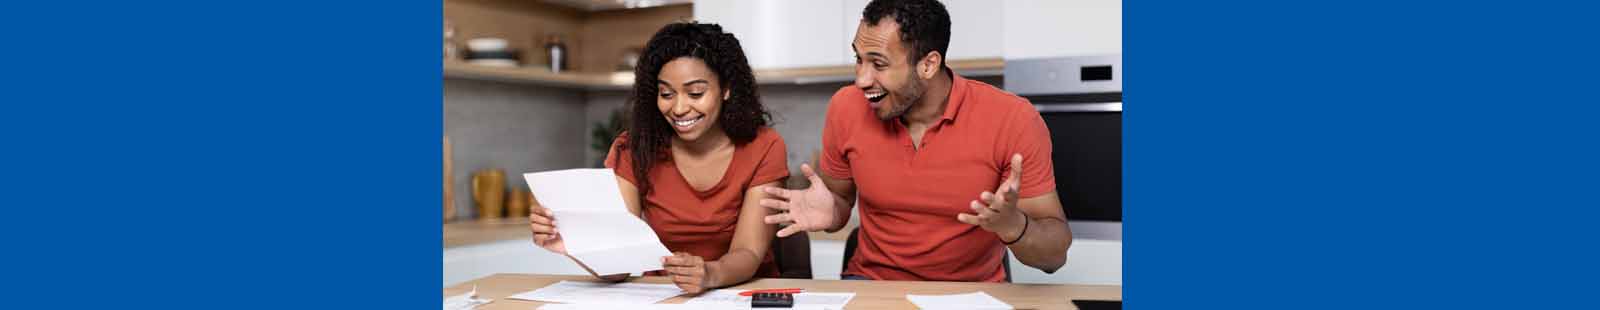 Man and woman looking at their statement with smiles on their face